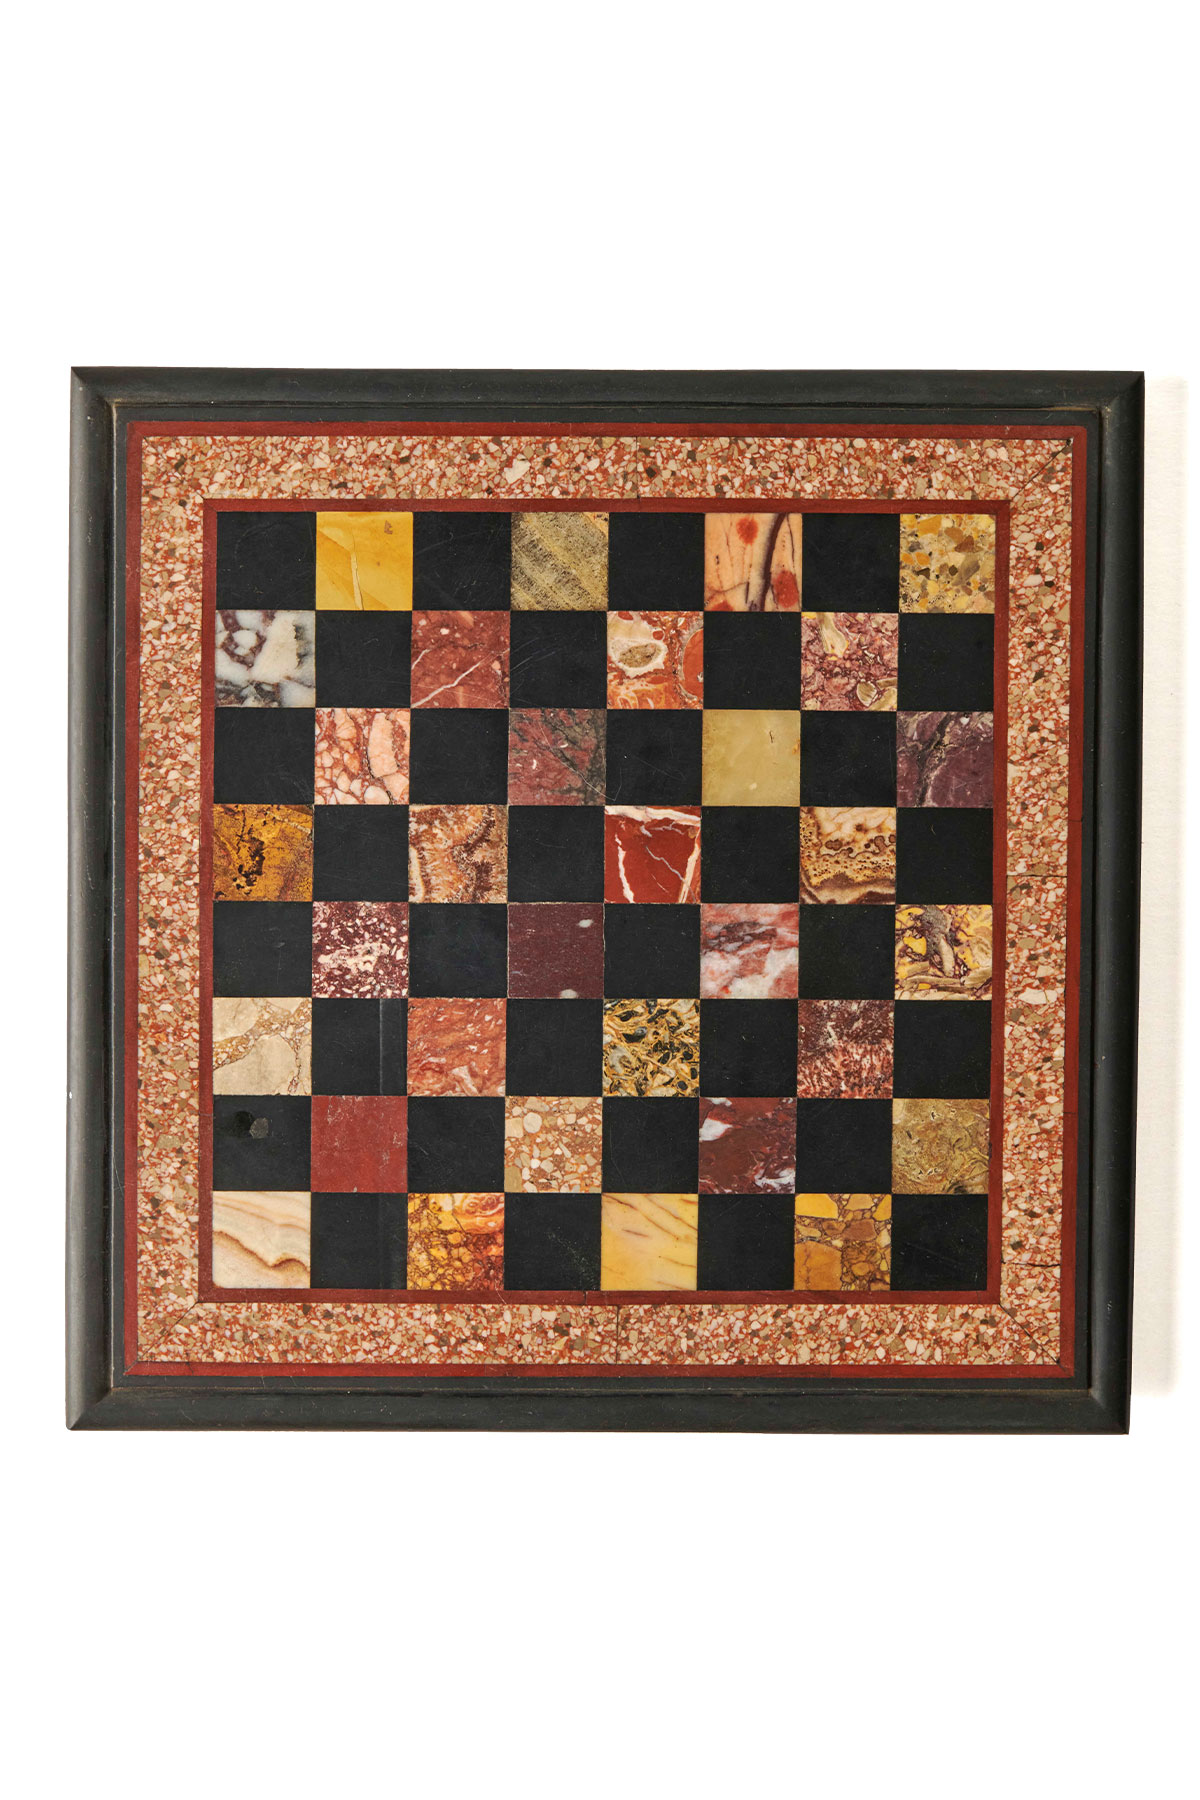 Circa 1820 Marble Chessboard from Nick Brock & Company